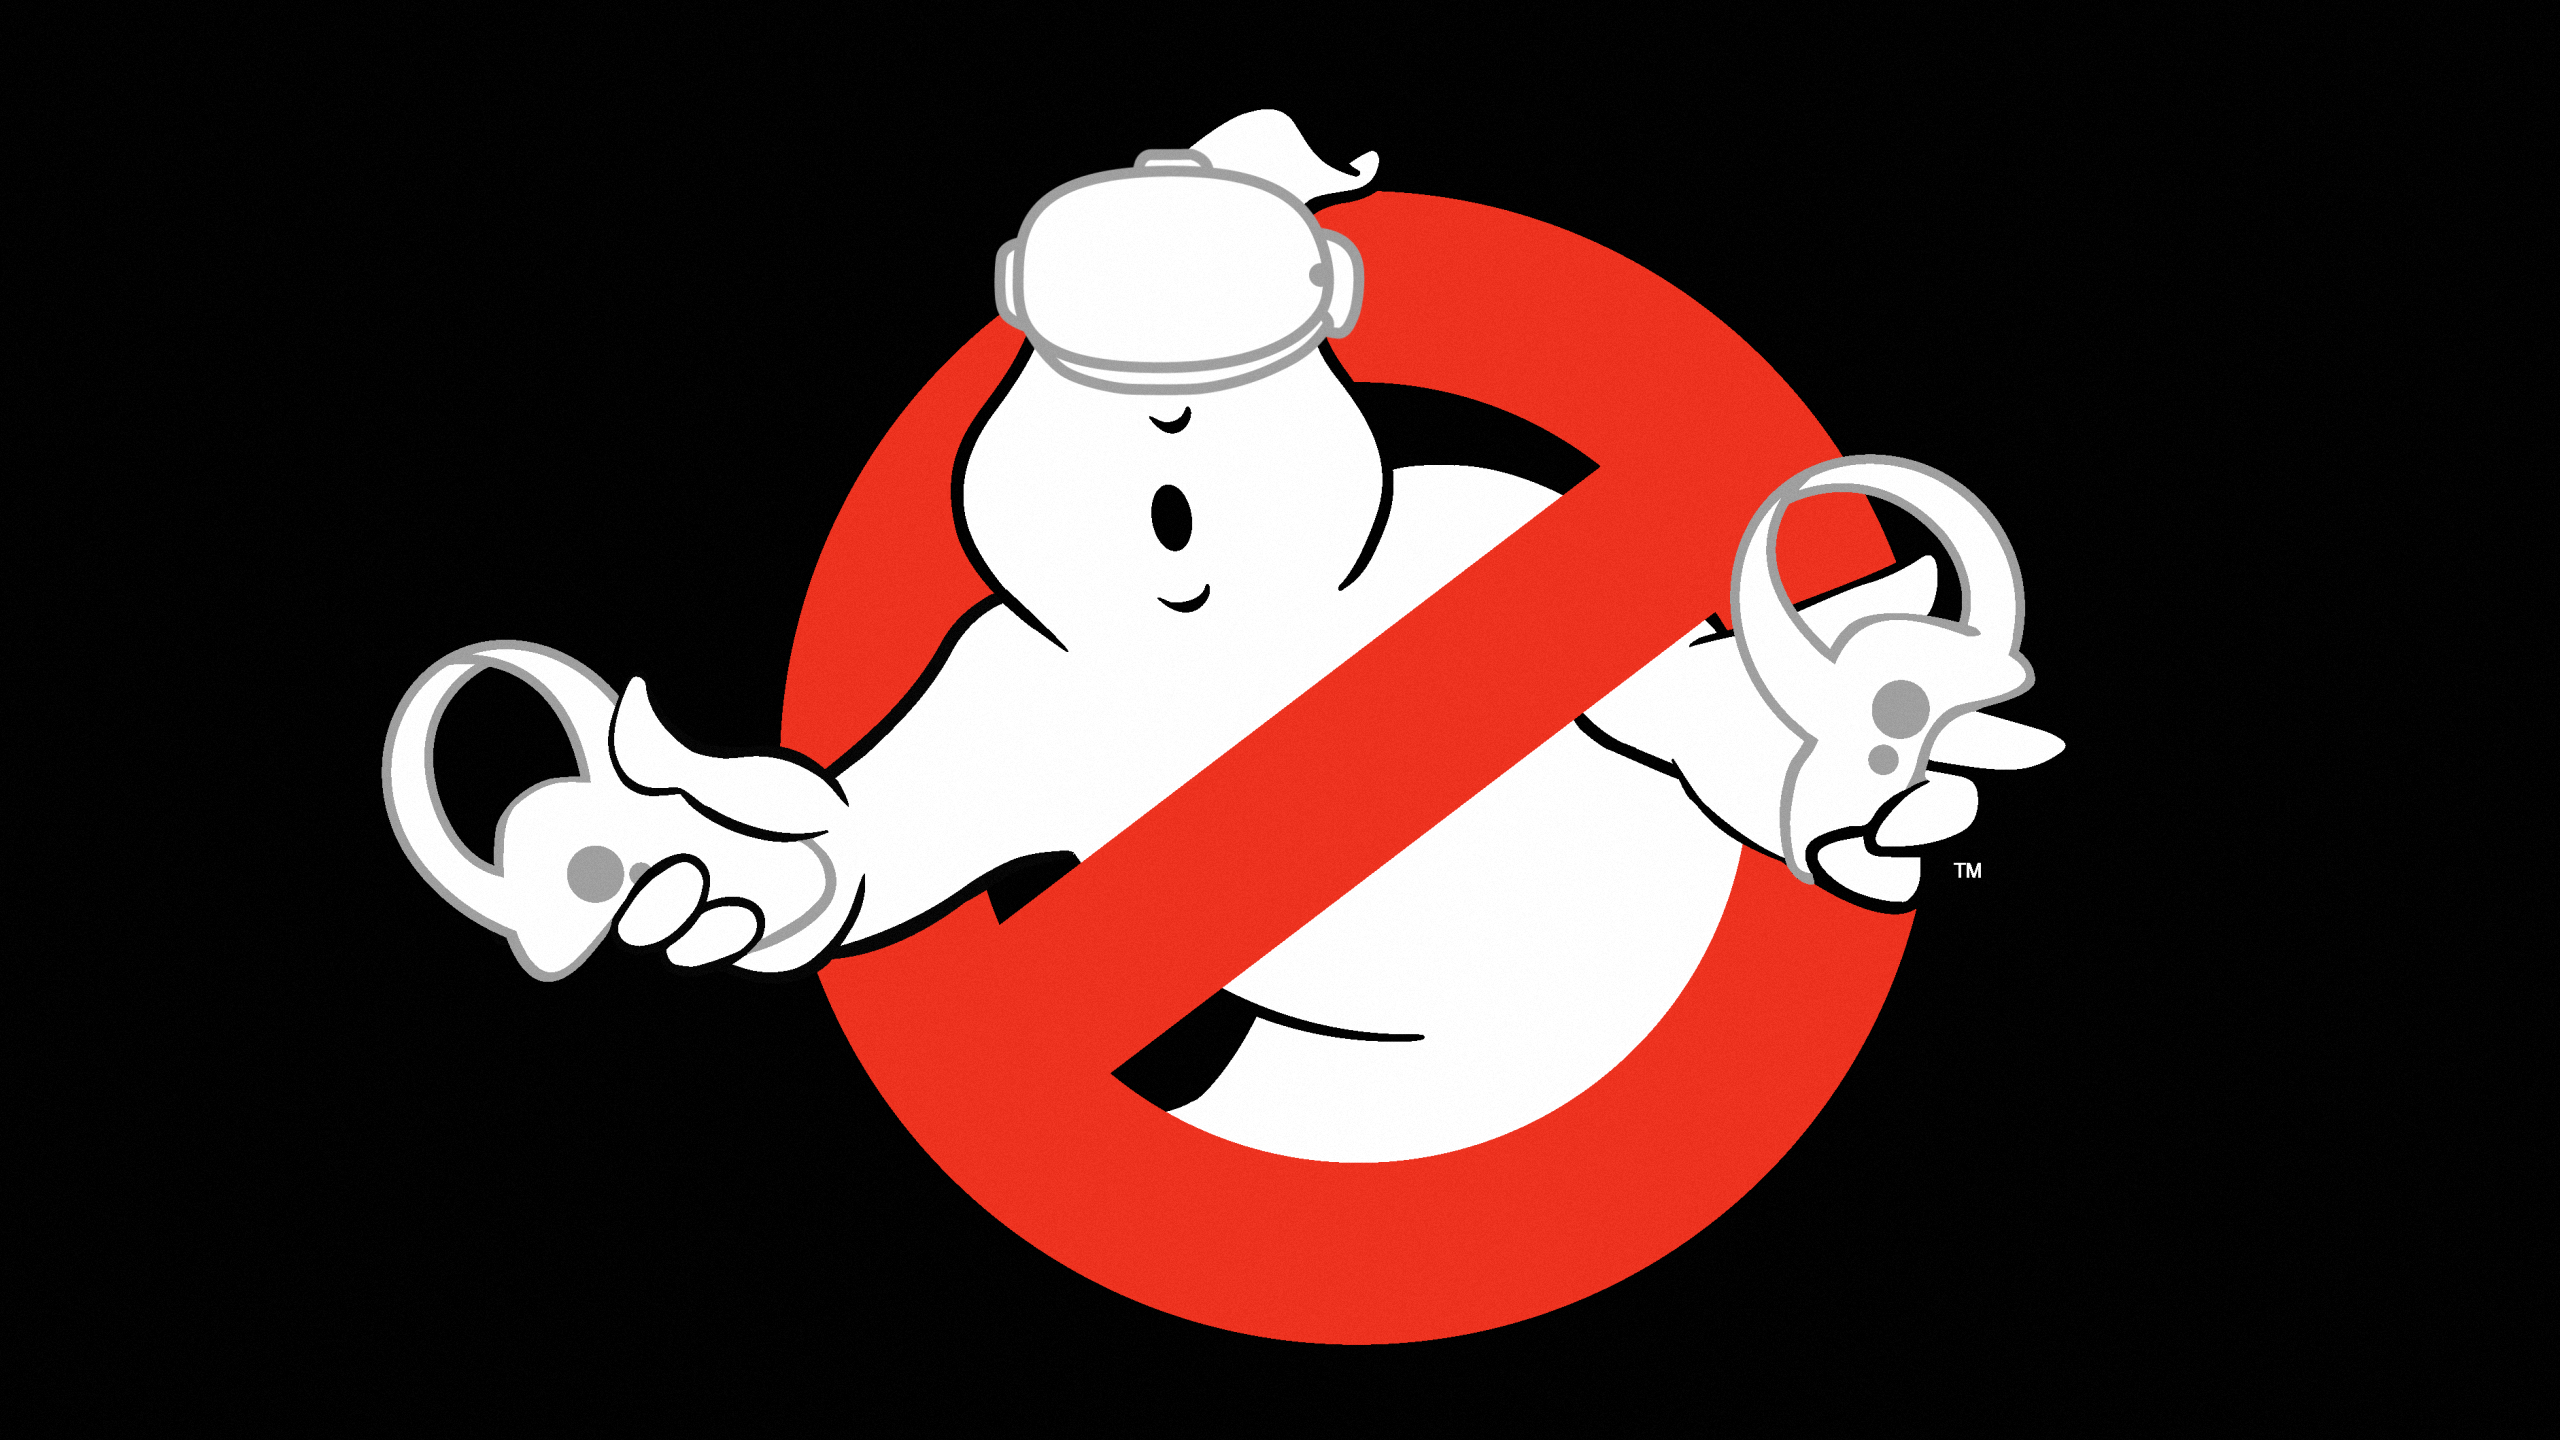 New Ghostbusters VR logo - the ghost is wearing Quest 2